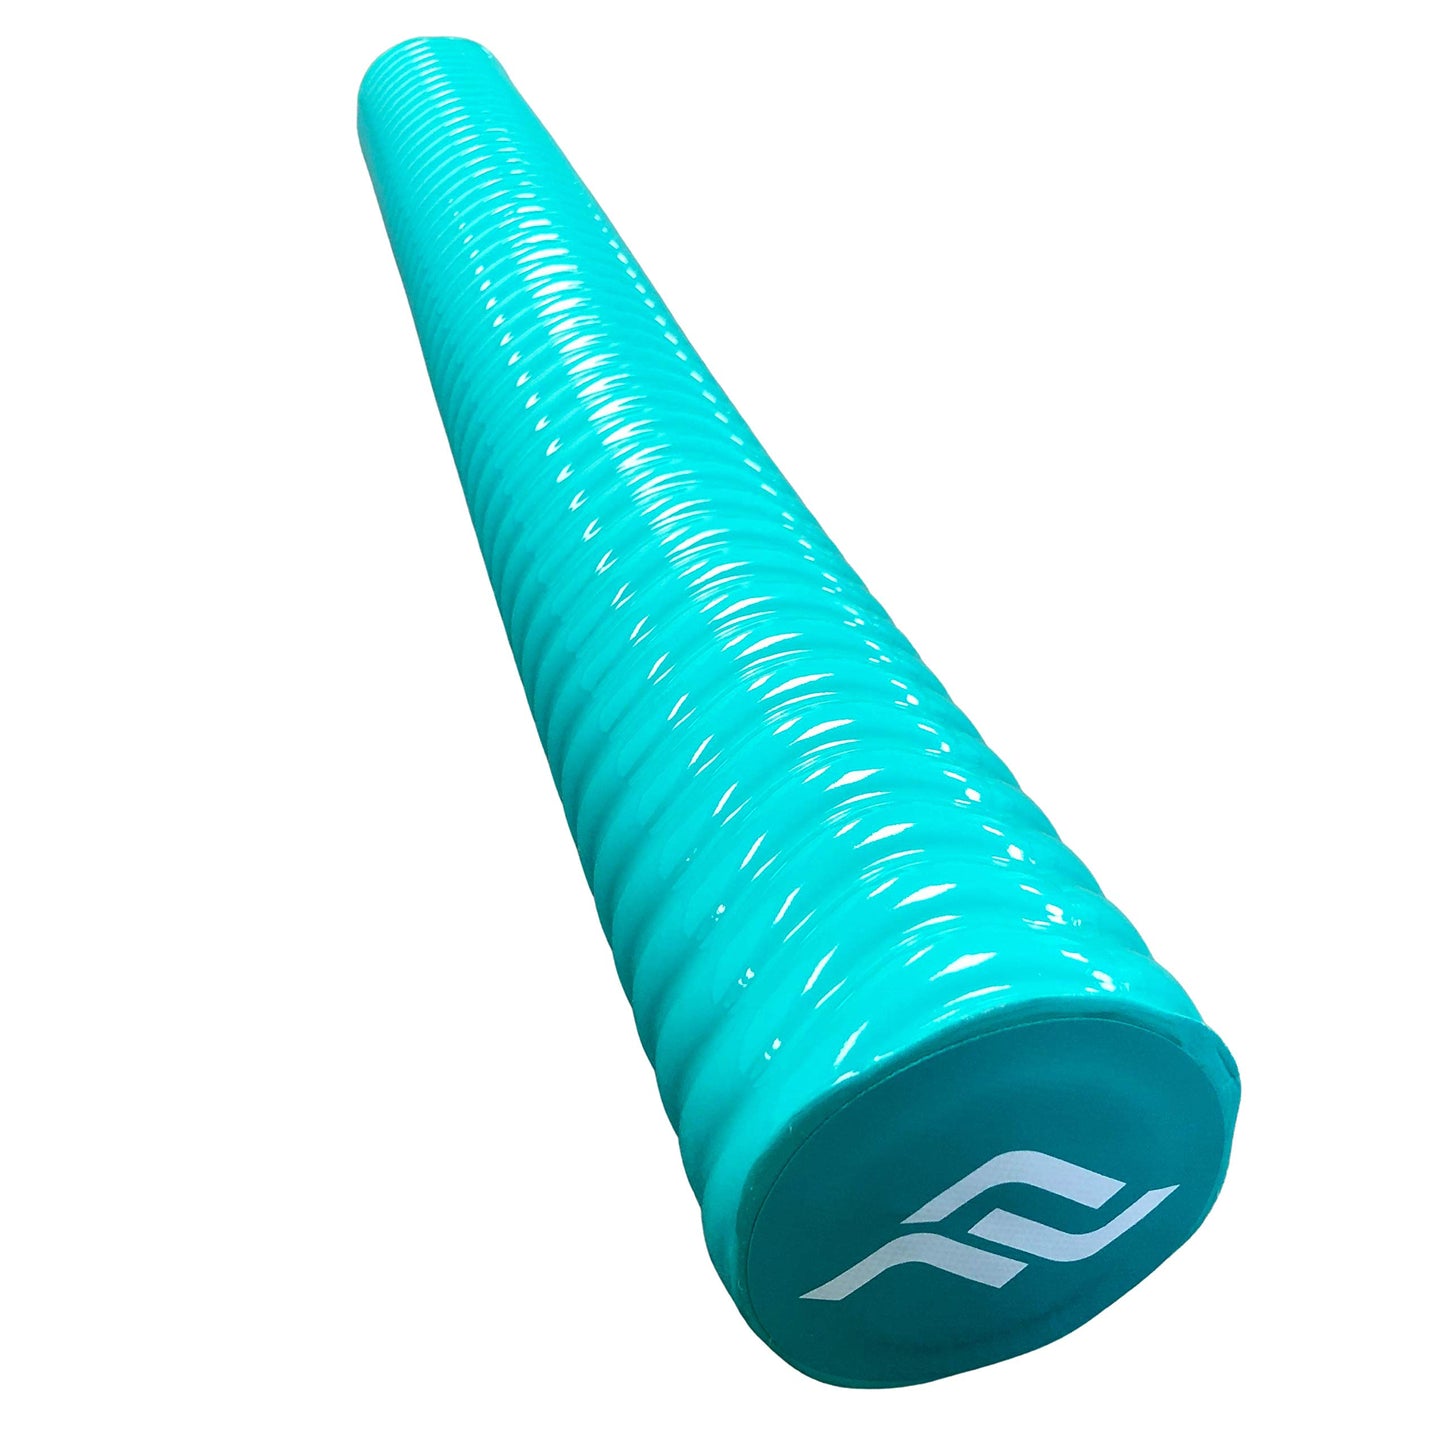 IMMERSA Jumbo Swimming Pool Noodles, Premium Water-Based Vinyl Coating and UV Resistant Soft Foam Noodles for Swimming and Floating, Lake Floats, Pool Floats for Adults and Kids. Teal